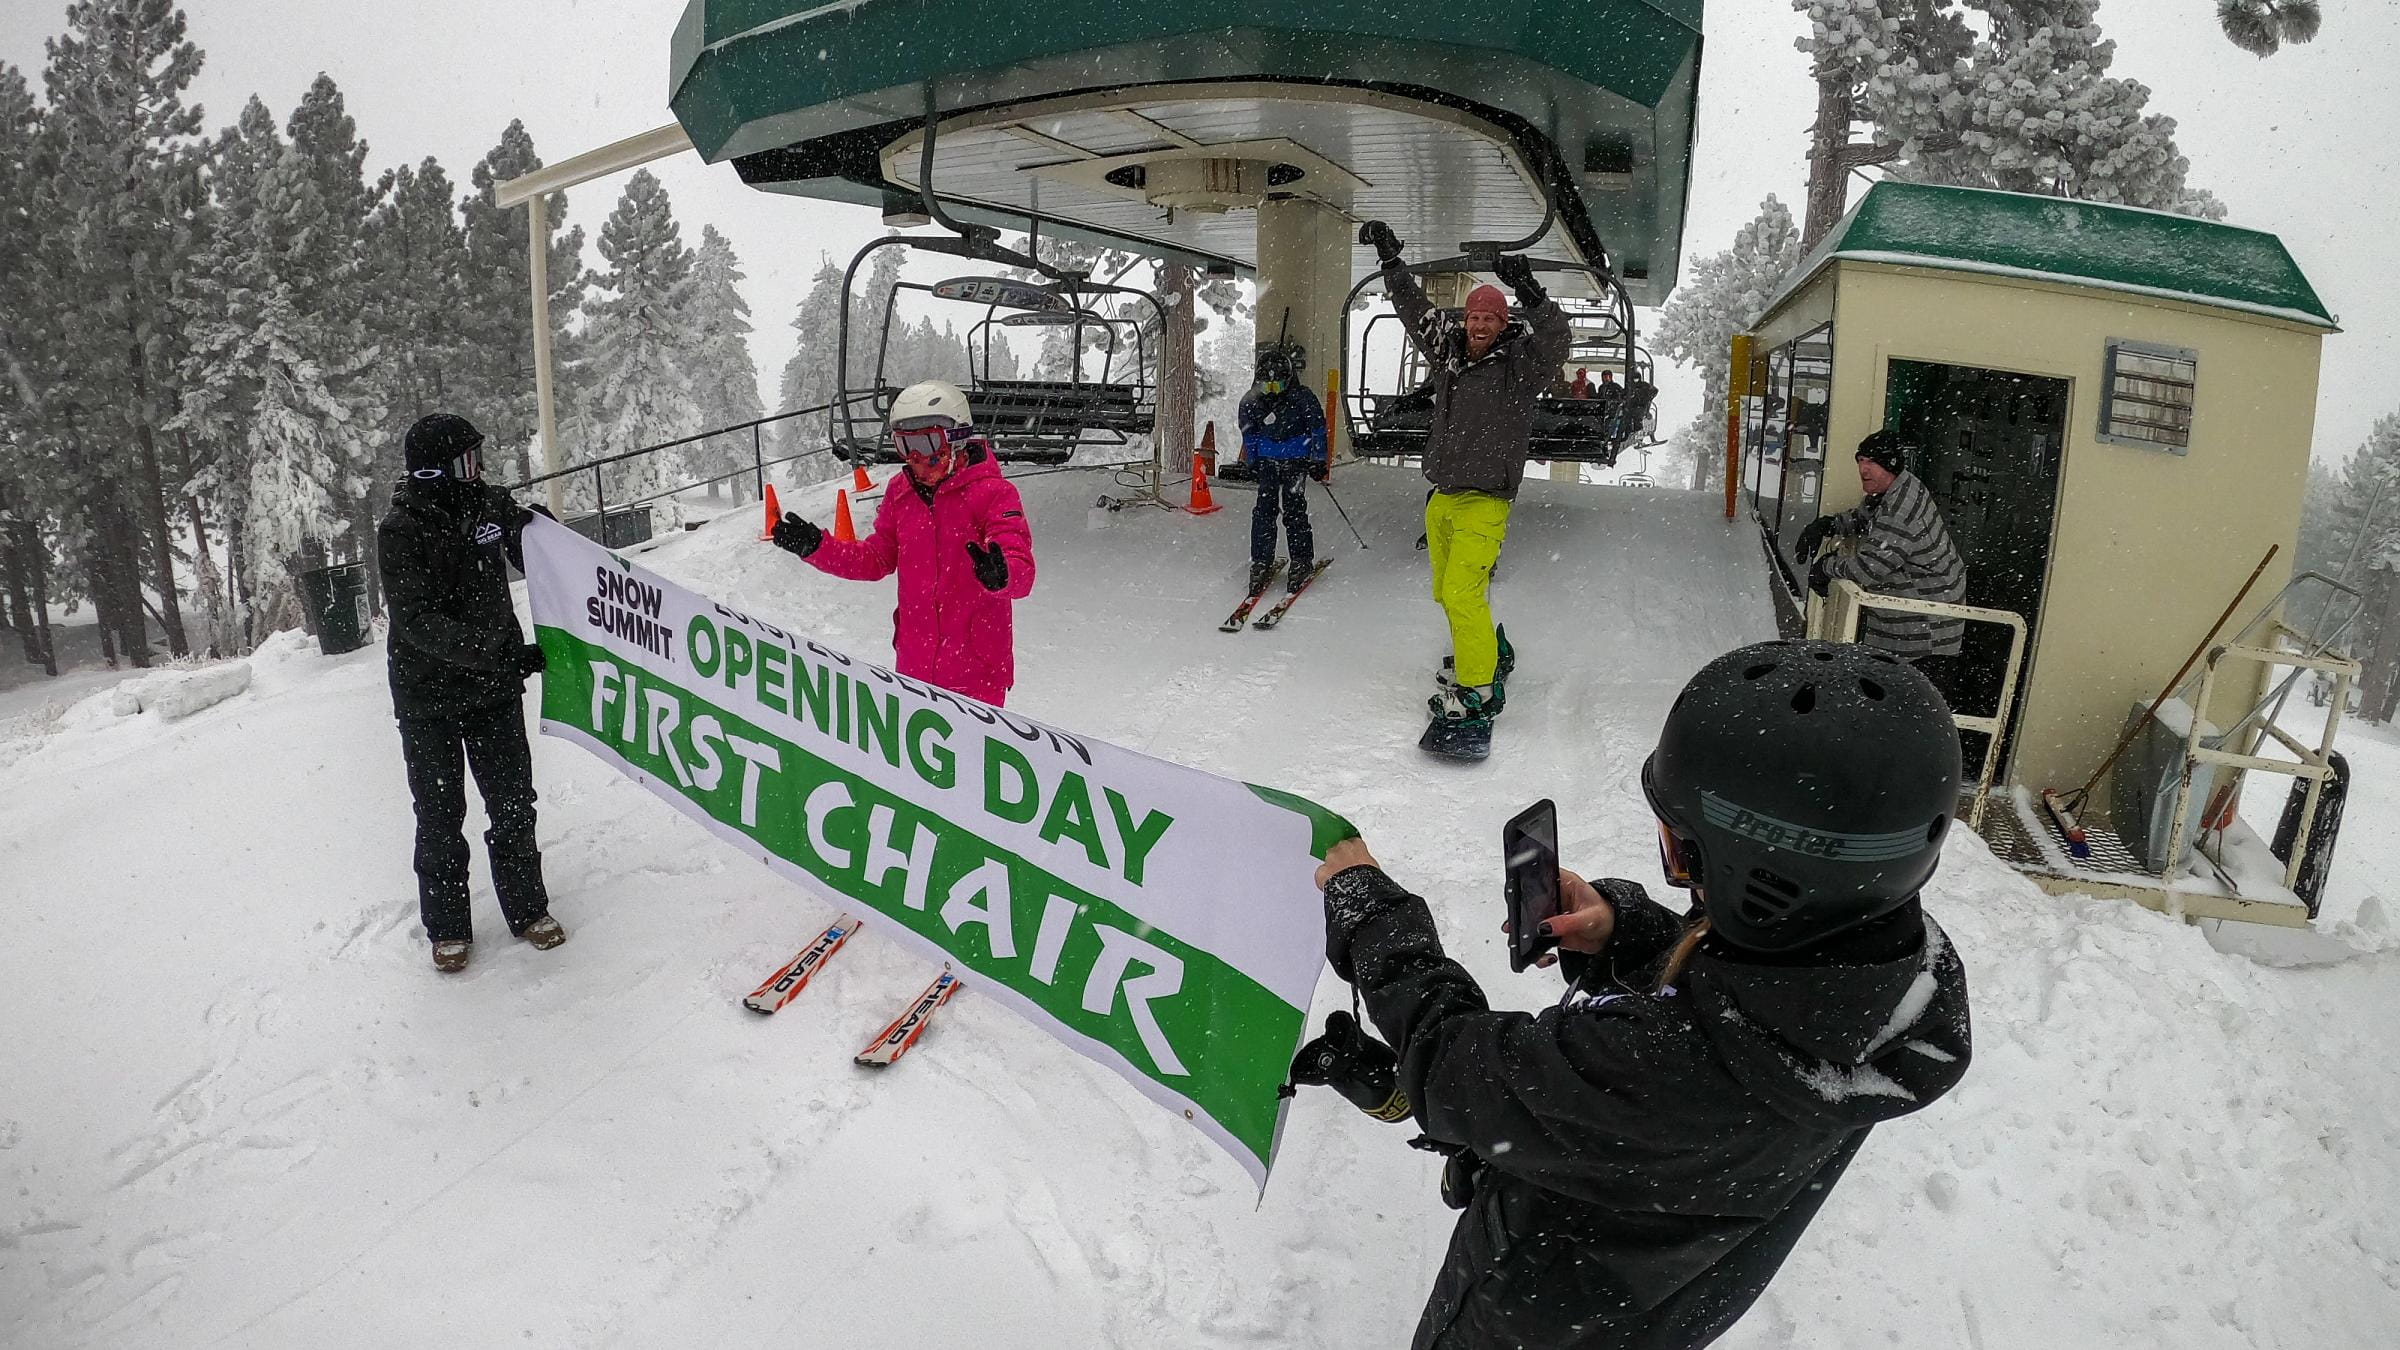 skier going through "First Chair" sign